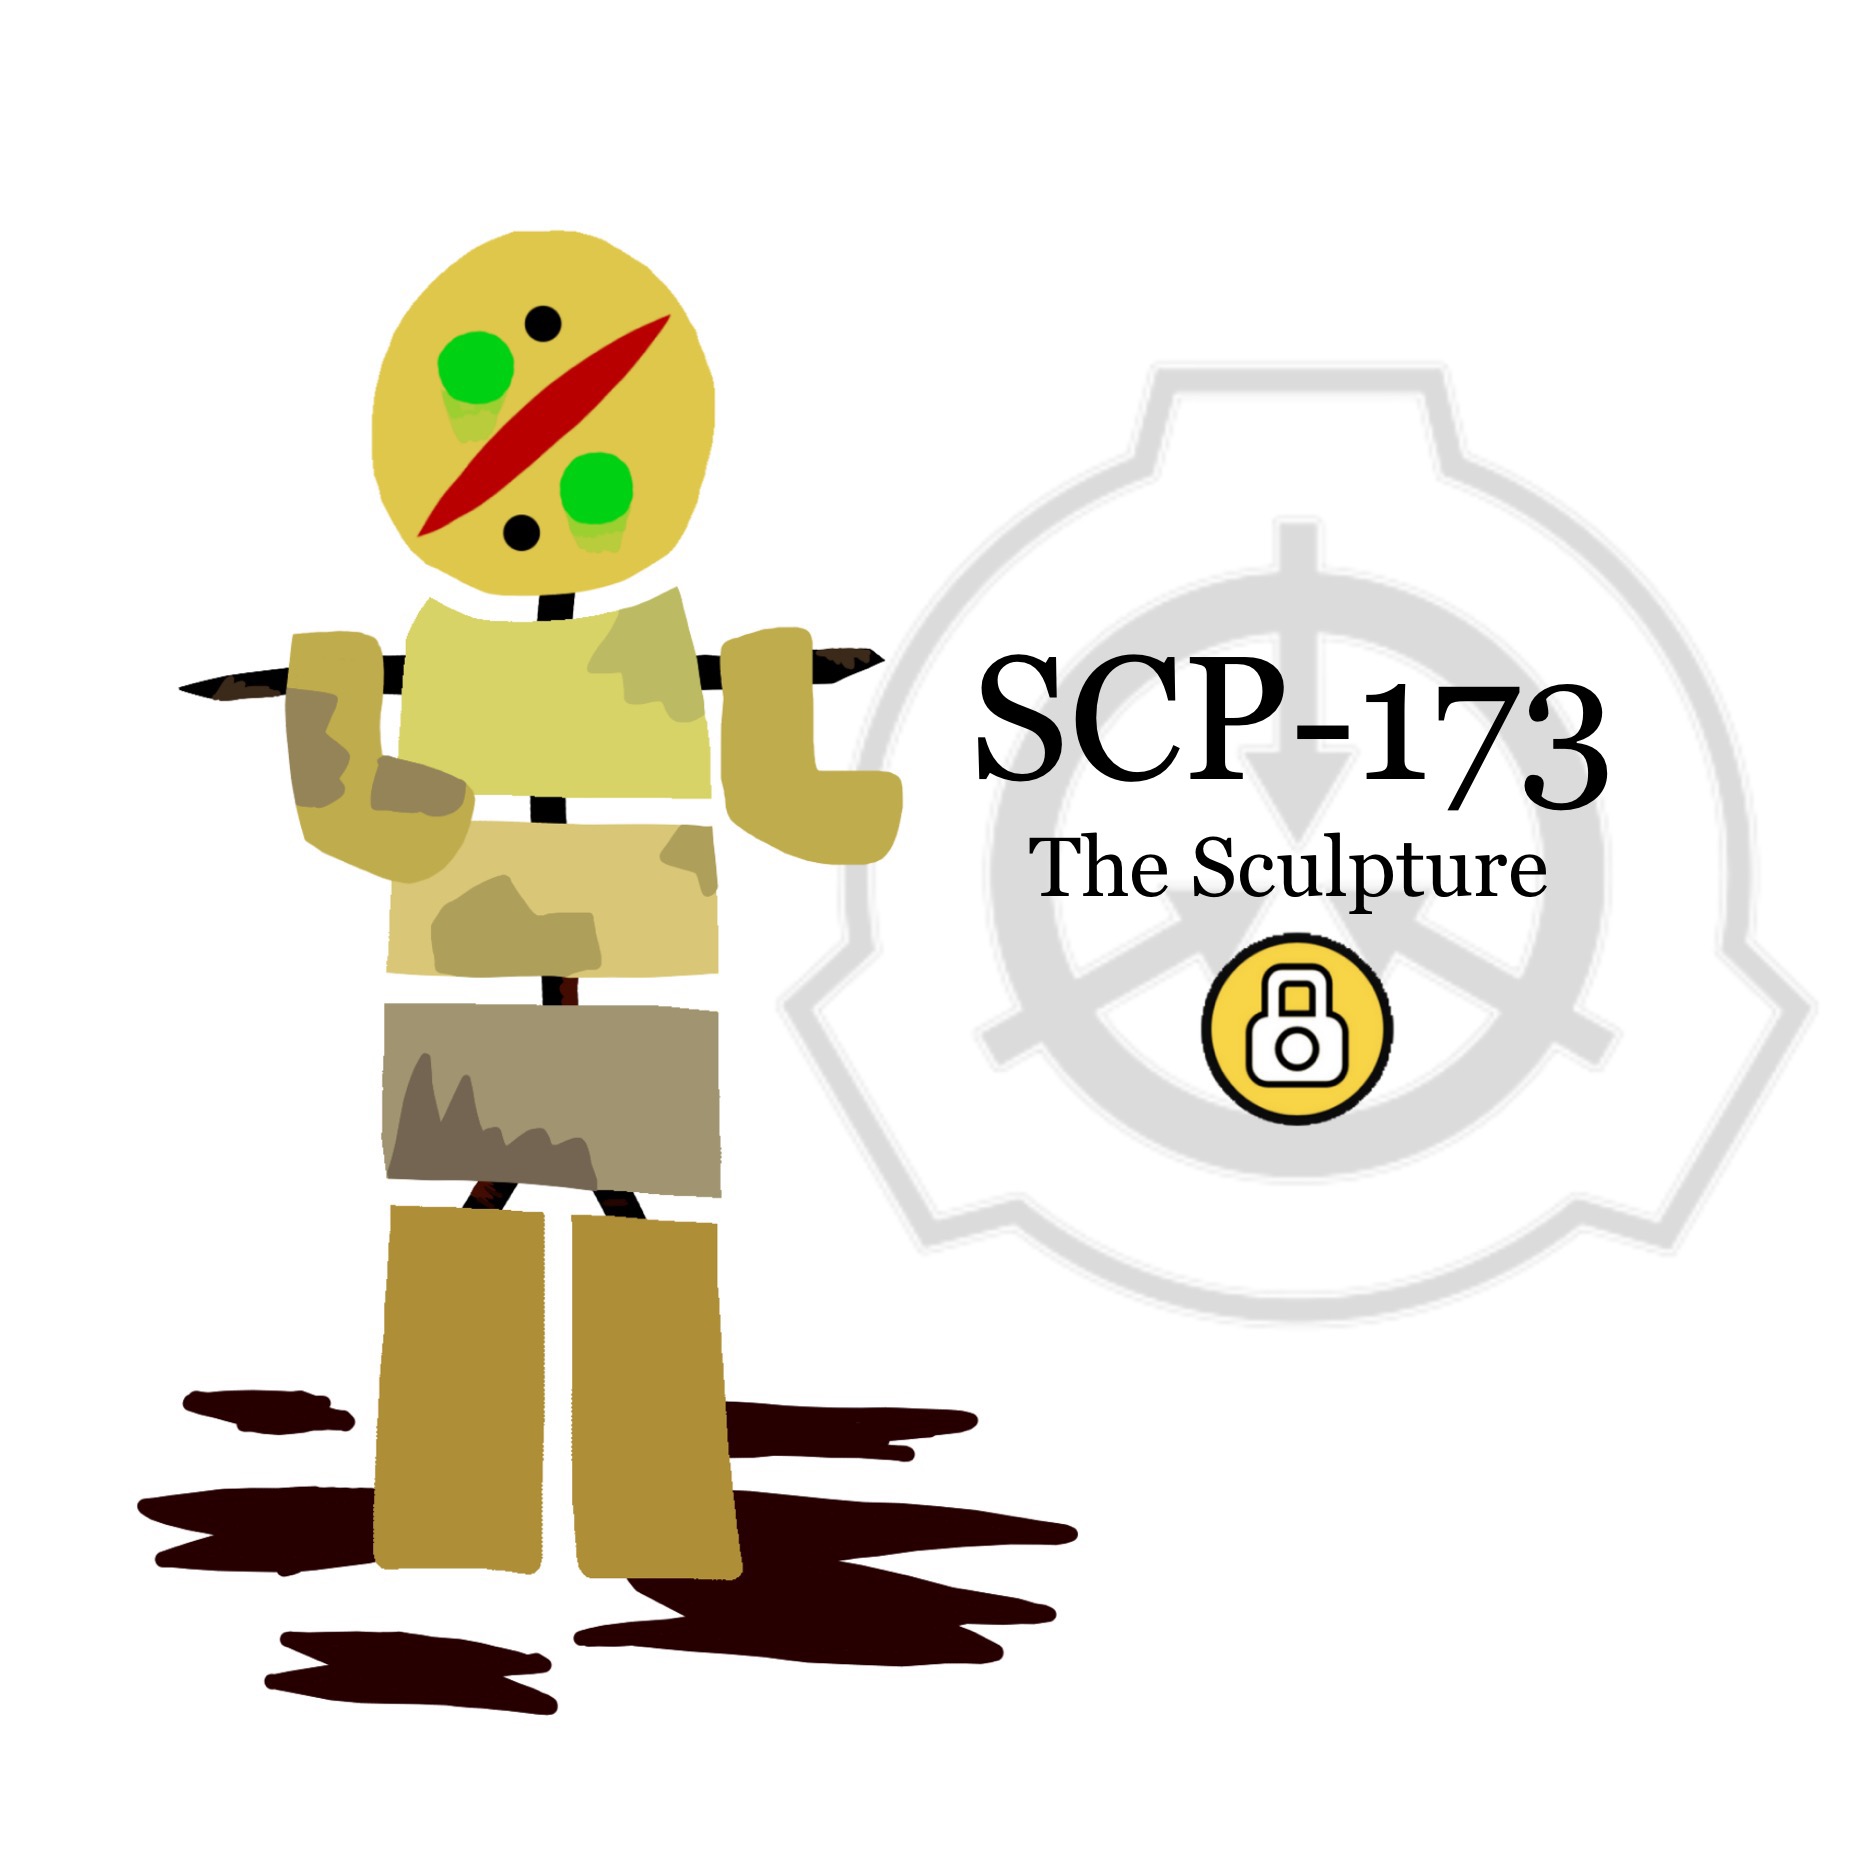 Special Containment Procedures: Item SCP-173 is to be kept in a locked  container at all